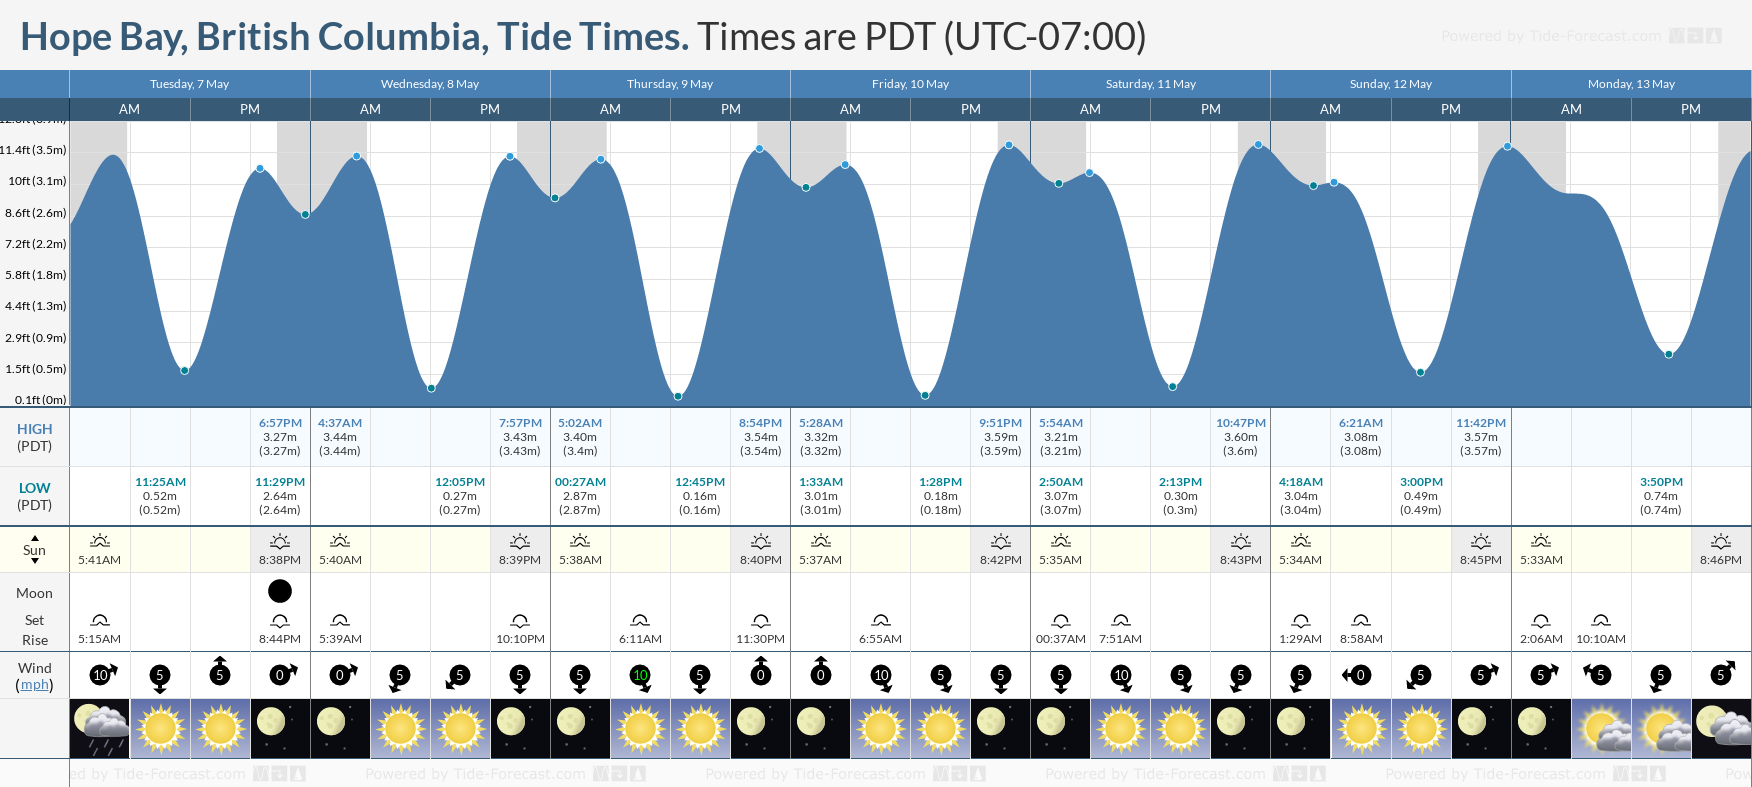 Hope Bay, British Columbia Tide Chart including high and low tide tide times for the next 7 days